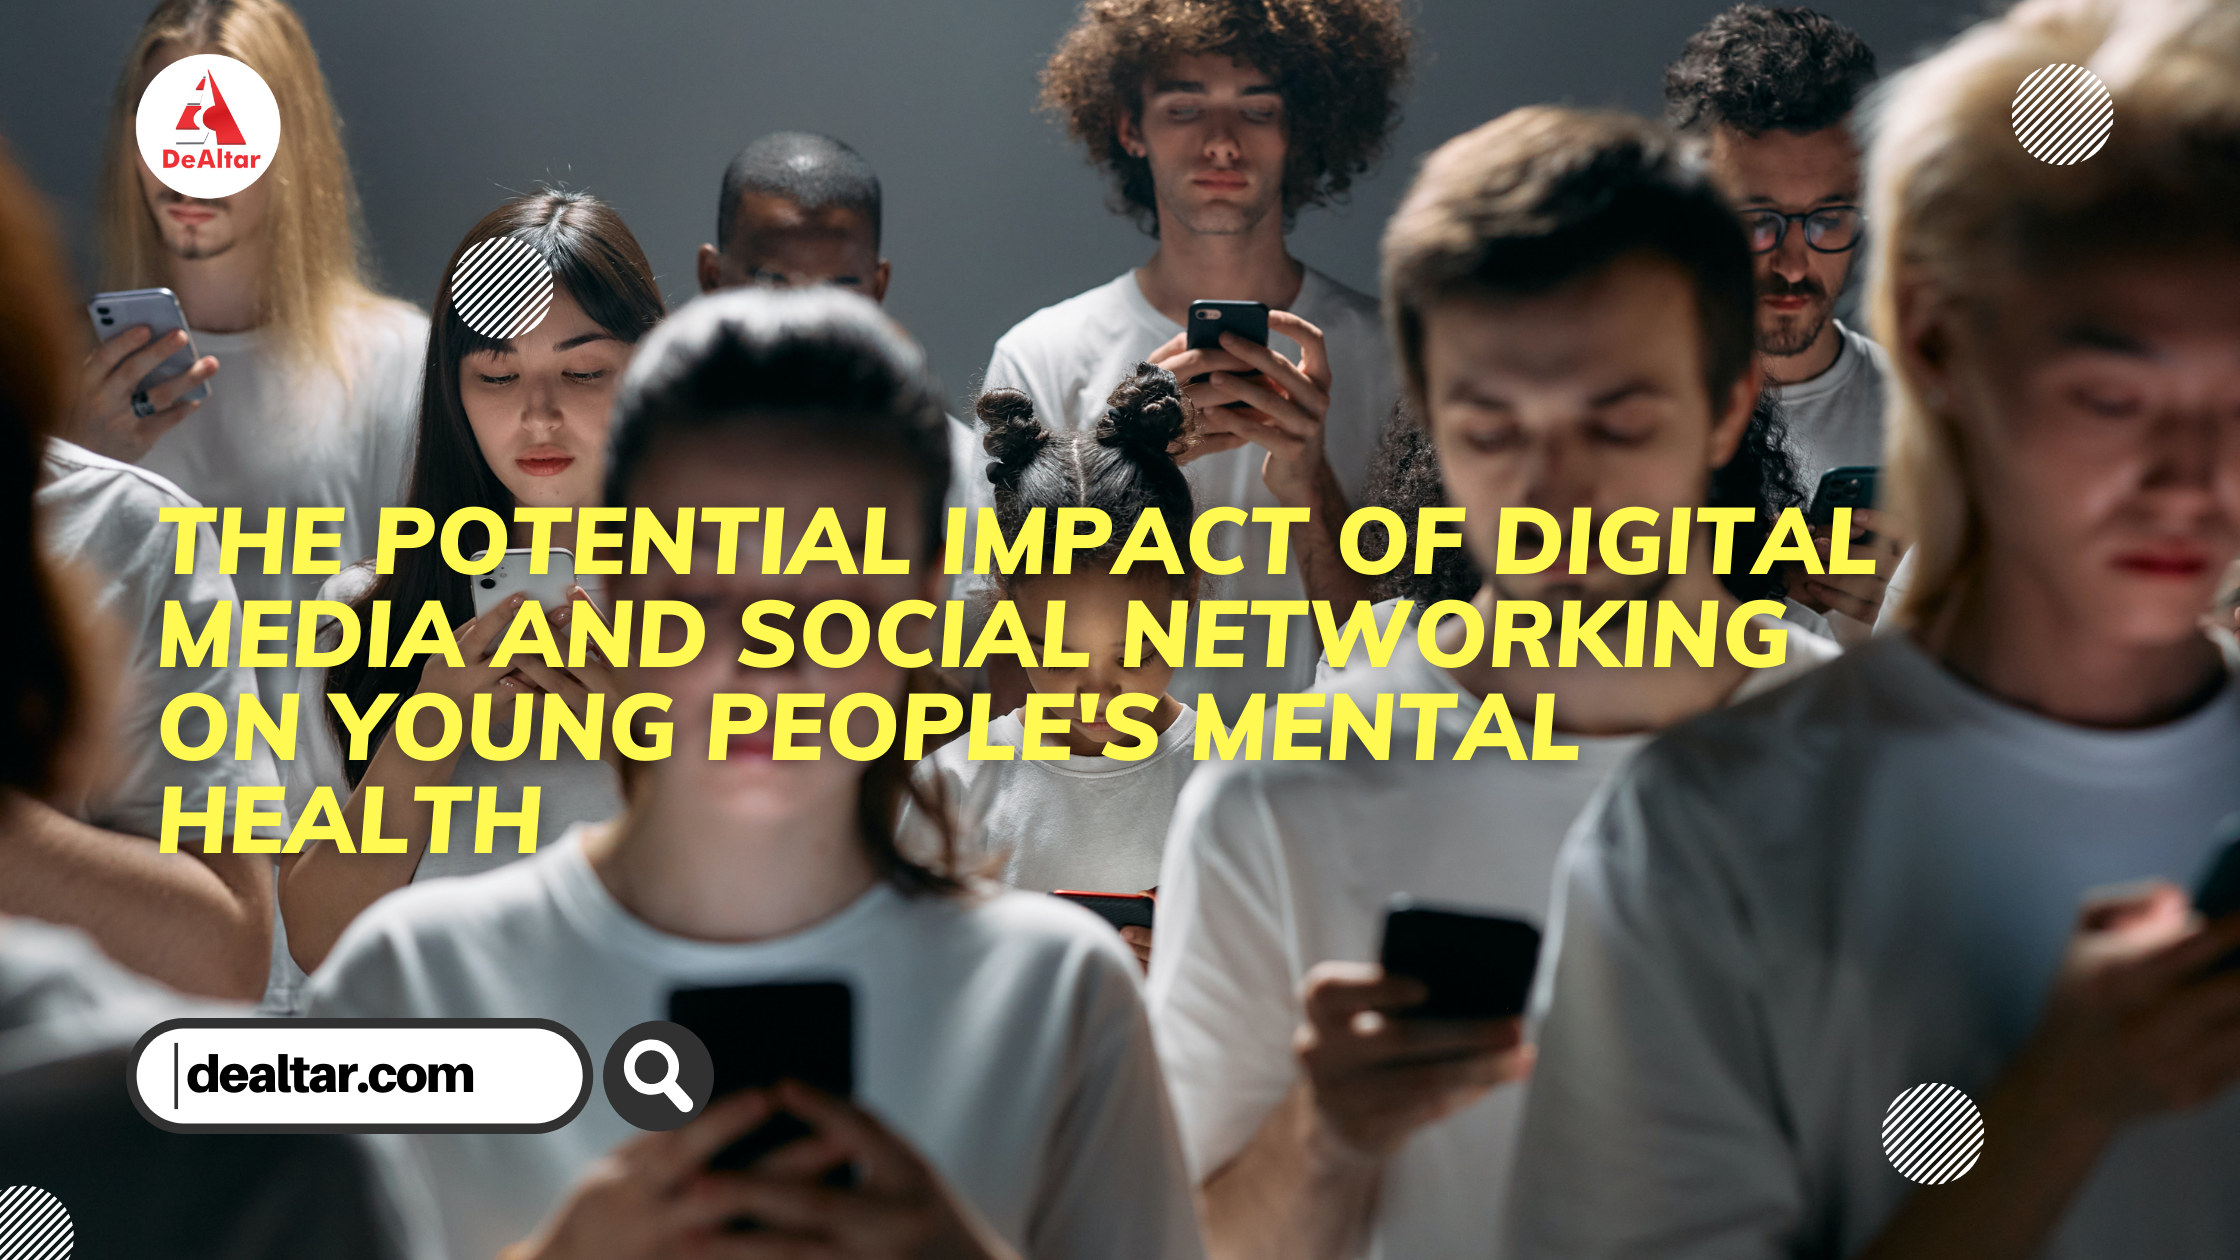 The Potential Impact Of Digital Media And Social Networking On Young People’s Mental Health